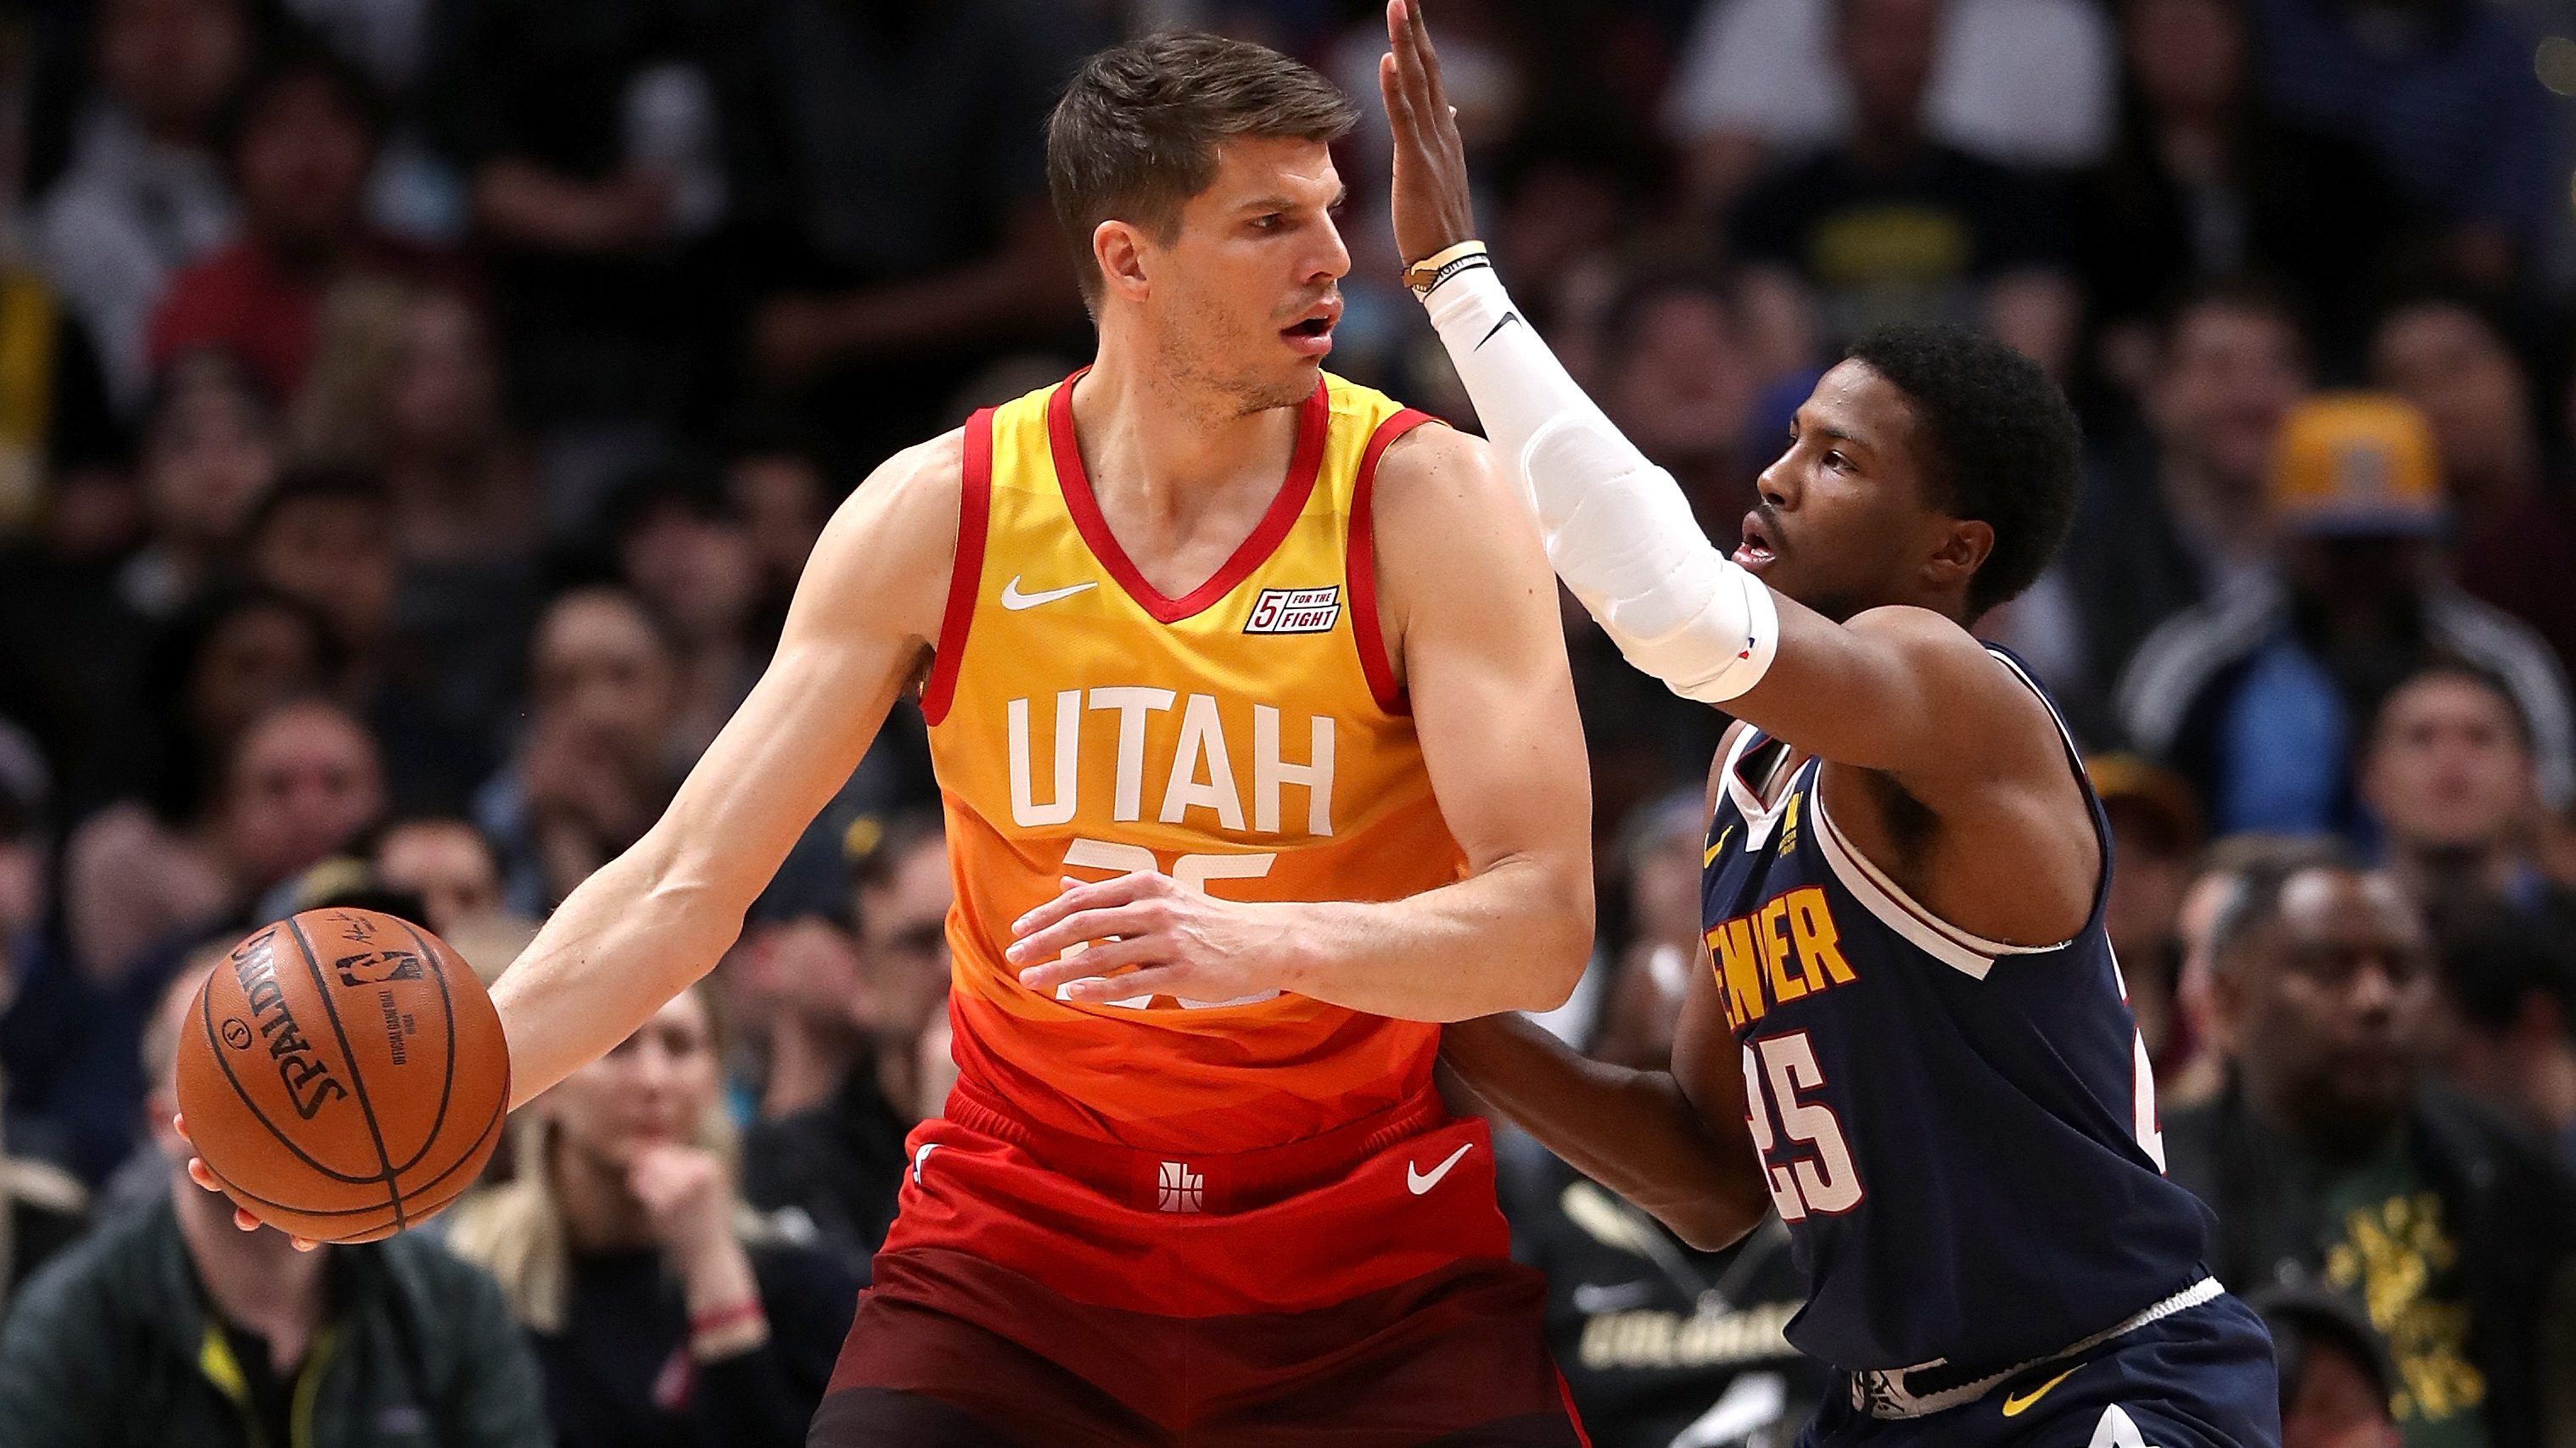 Lakers’ Projected Final Roster Kyle Korver Among Top Free Agency Fits